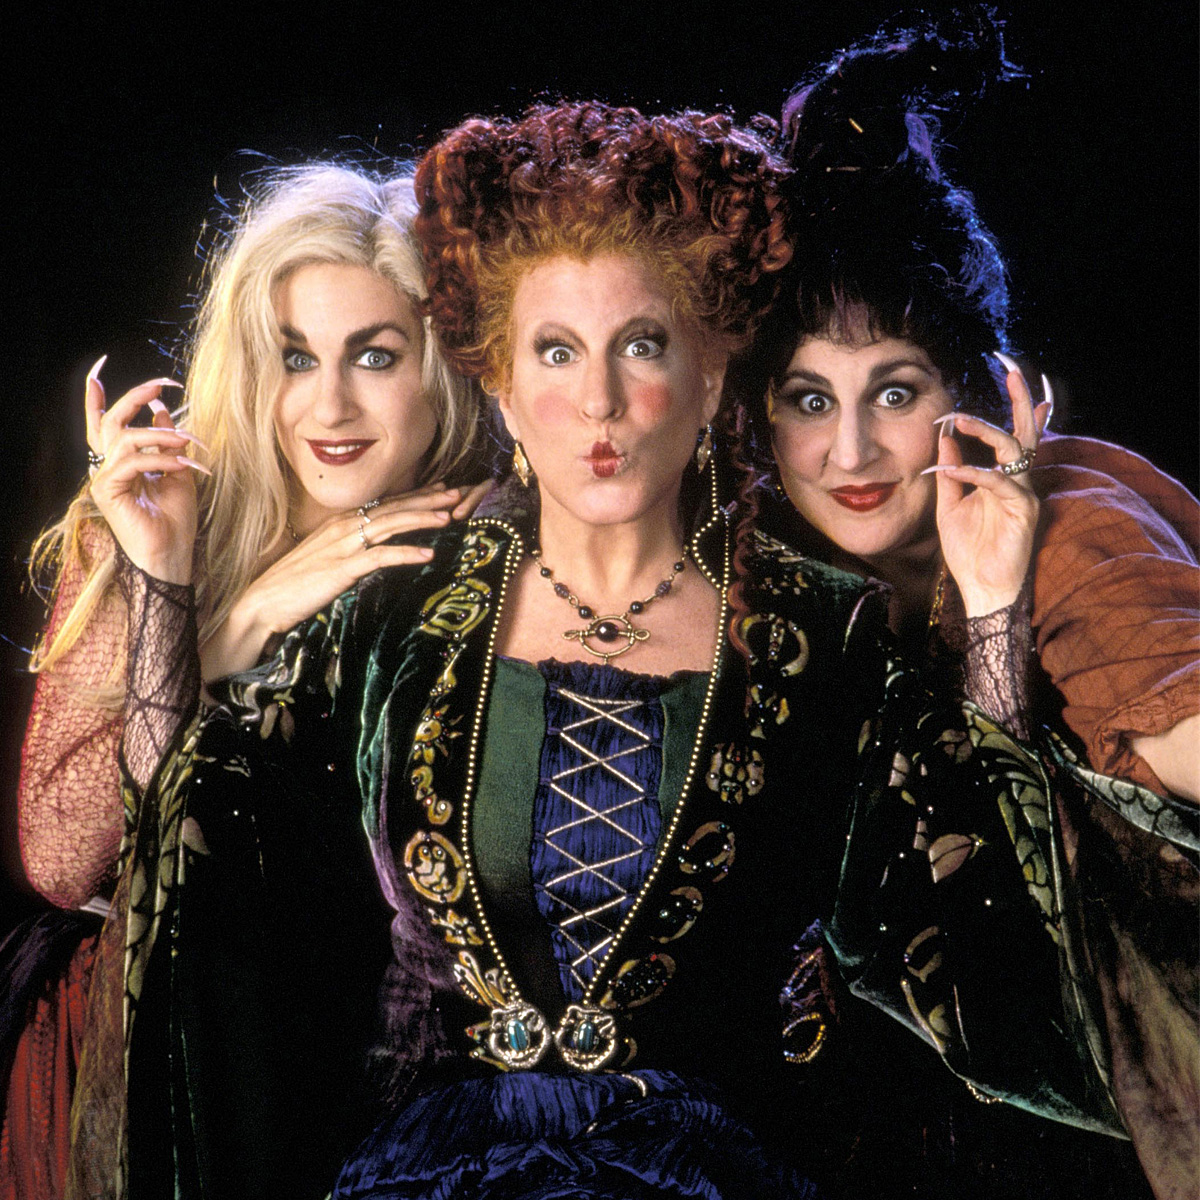 Will a Hocus Pocus 3 Be Conjured Up? Bette Midler Says…